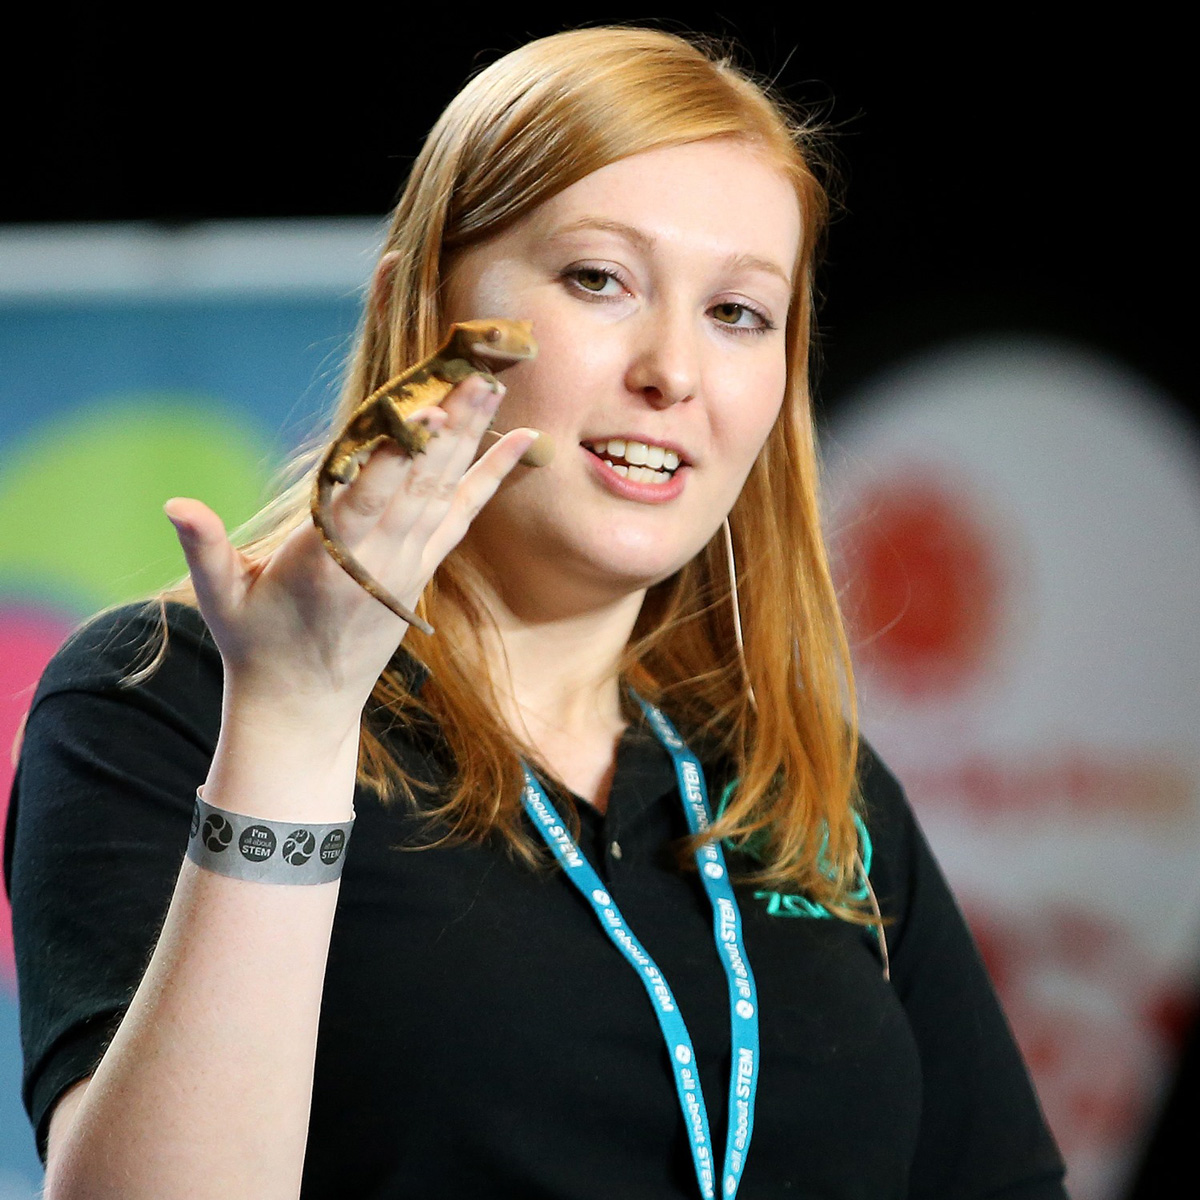 Do your students love nature? 🐍 🦈 Discover how humans are learning from nature with STEM with @ZoolabUK! Get up close and hands-on with some real live exotic creatures at The #BigBangFair - get free tickets: bit.ly/3U4vSWE